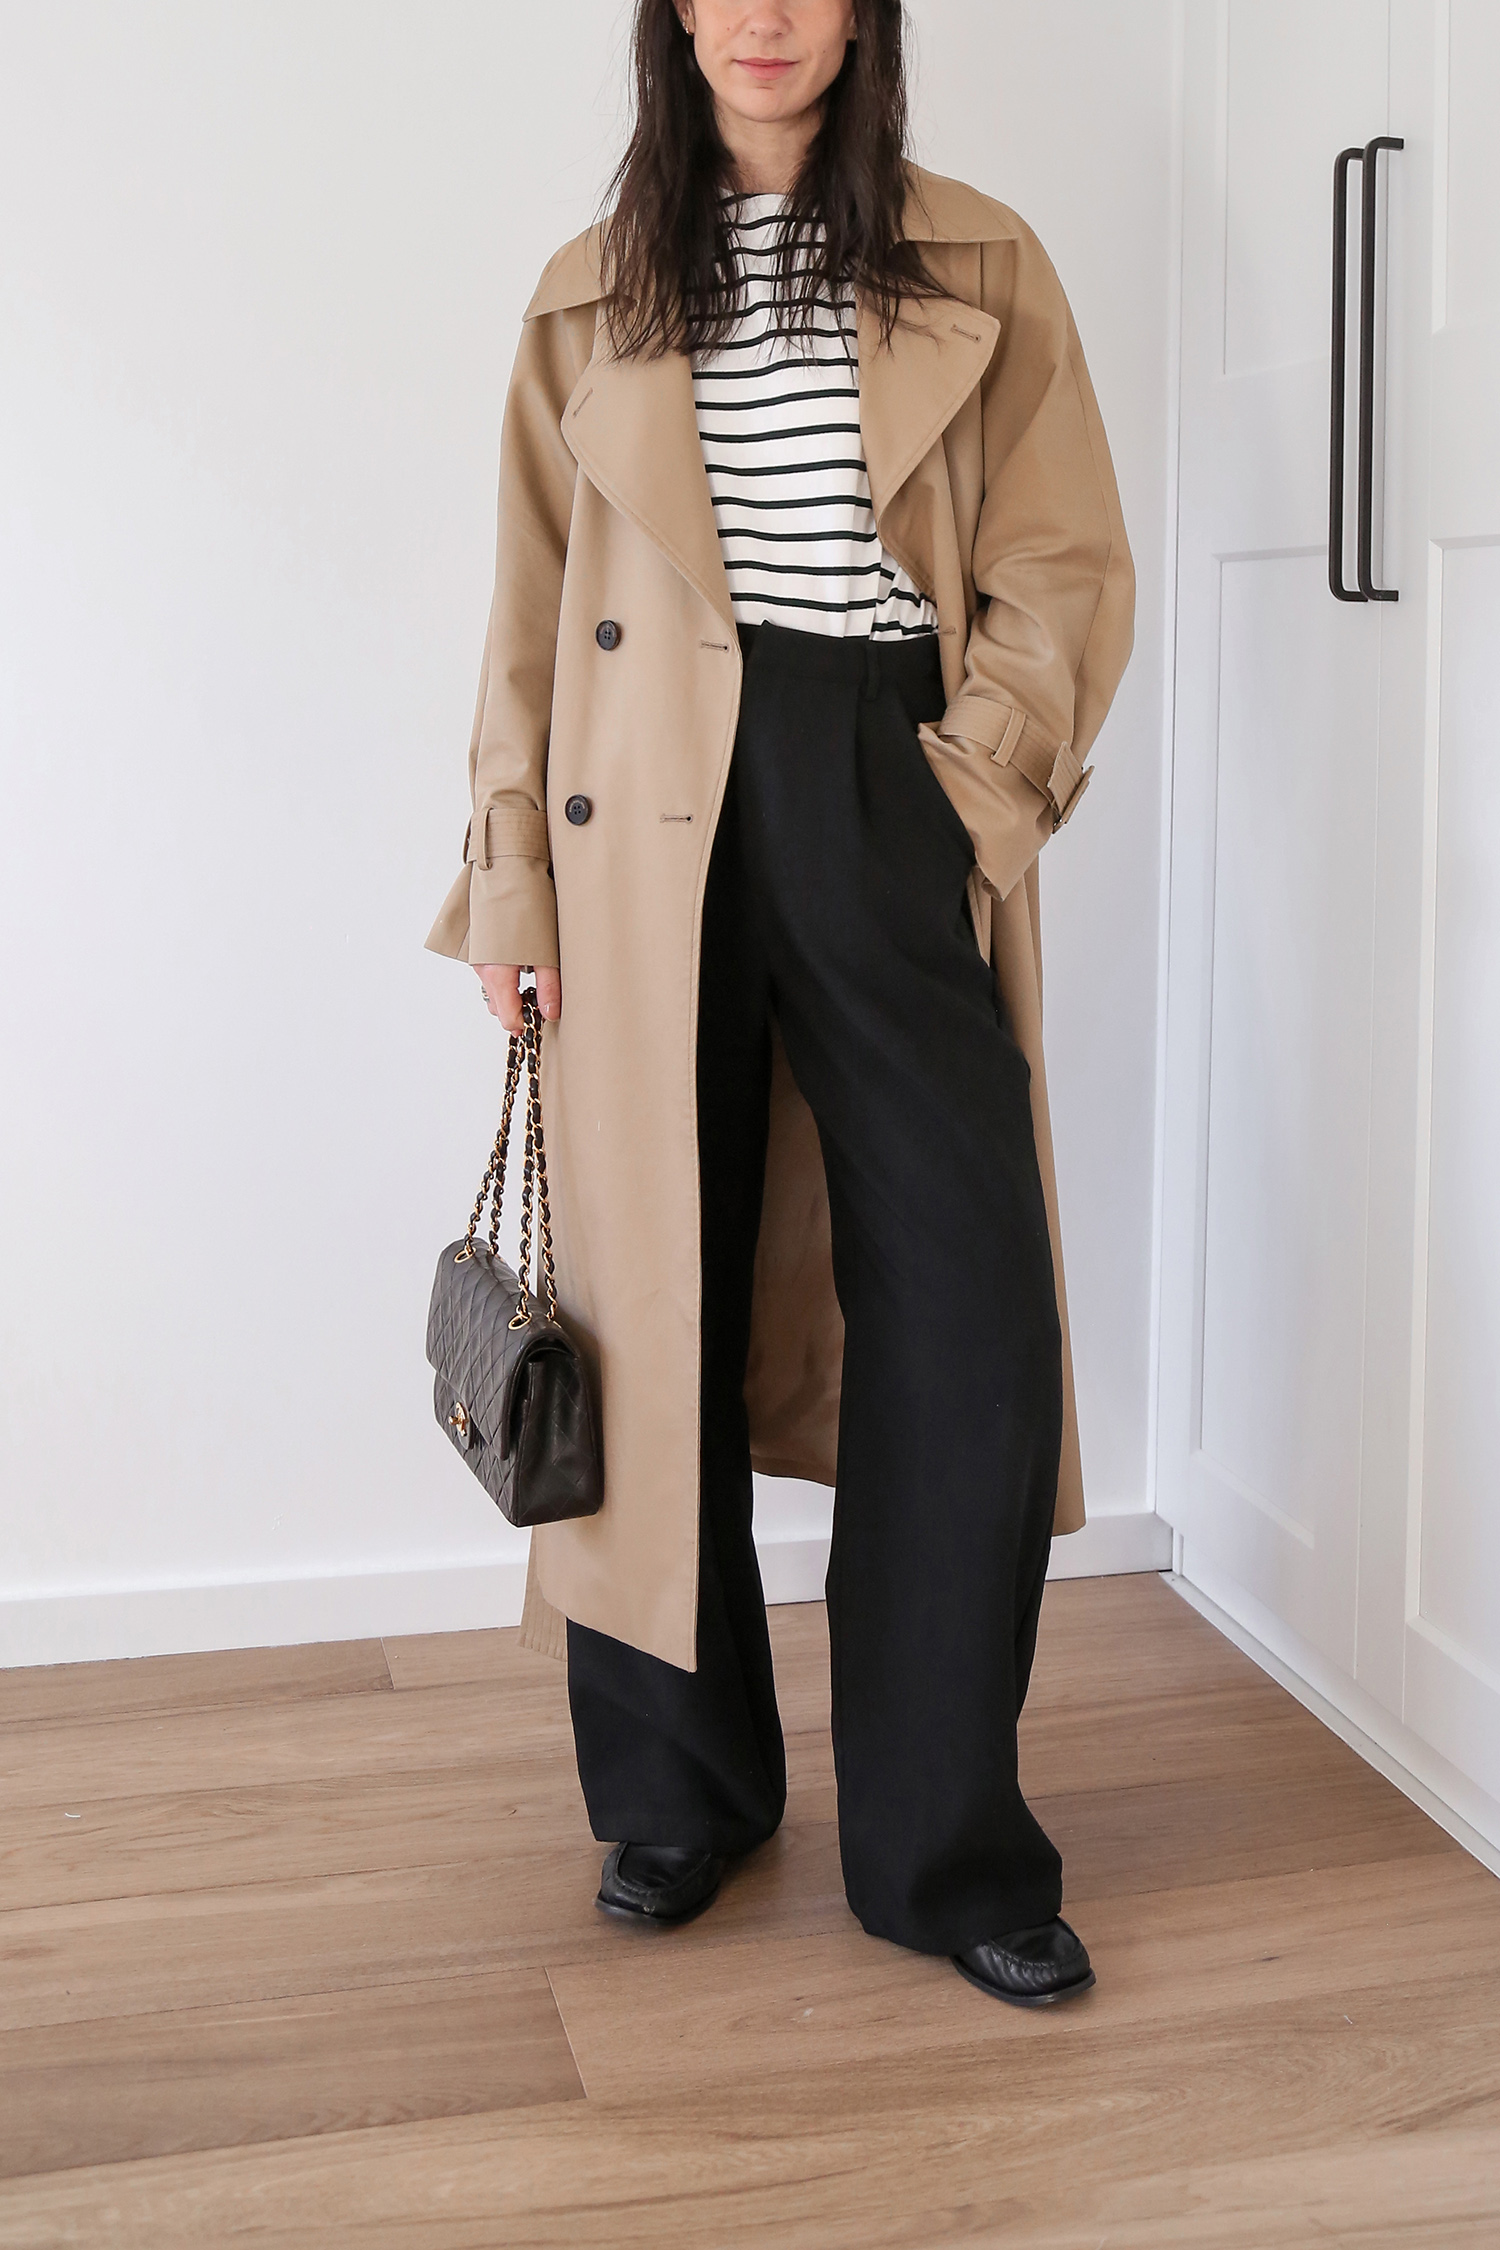 Simple outfit formula for effortless dressing - Mademoiselle